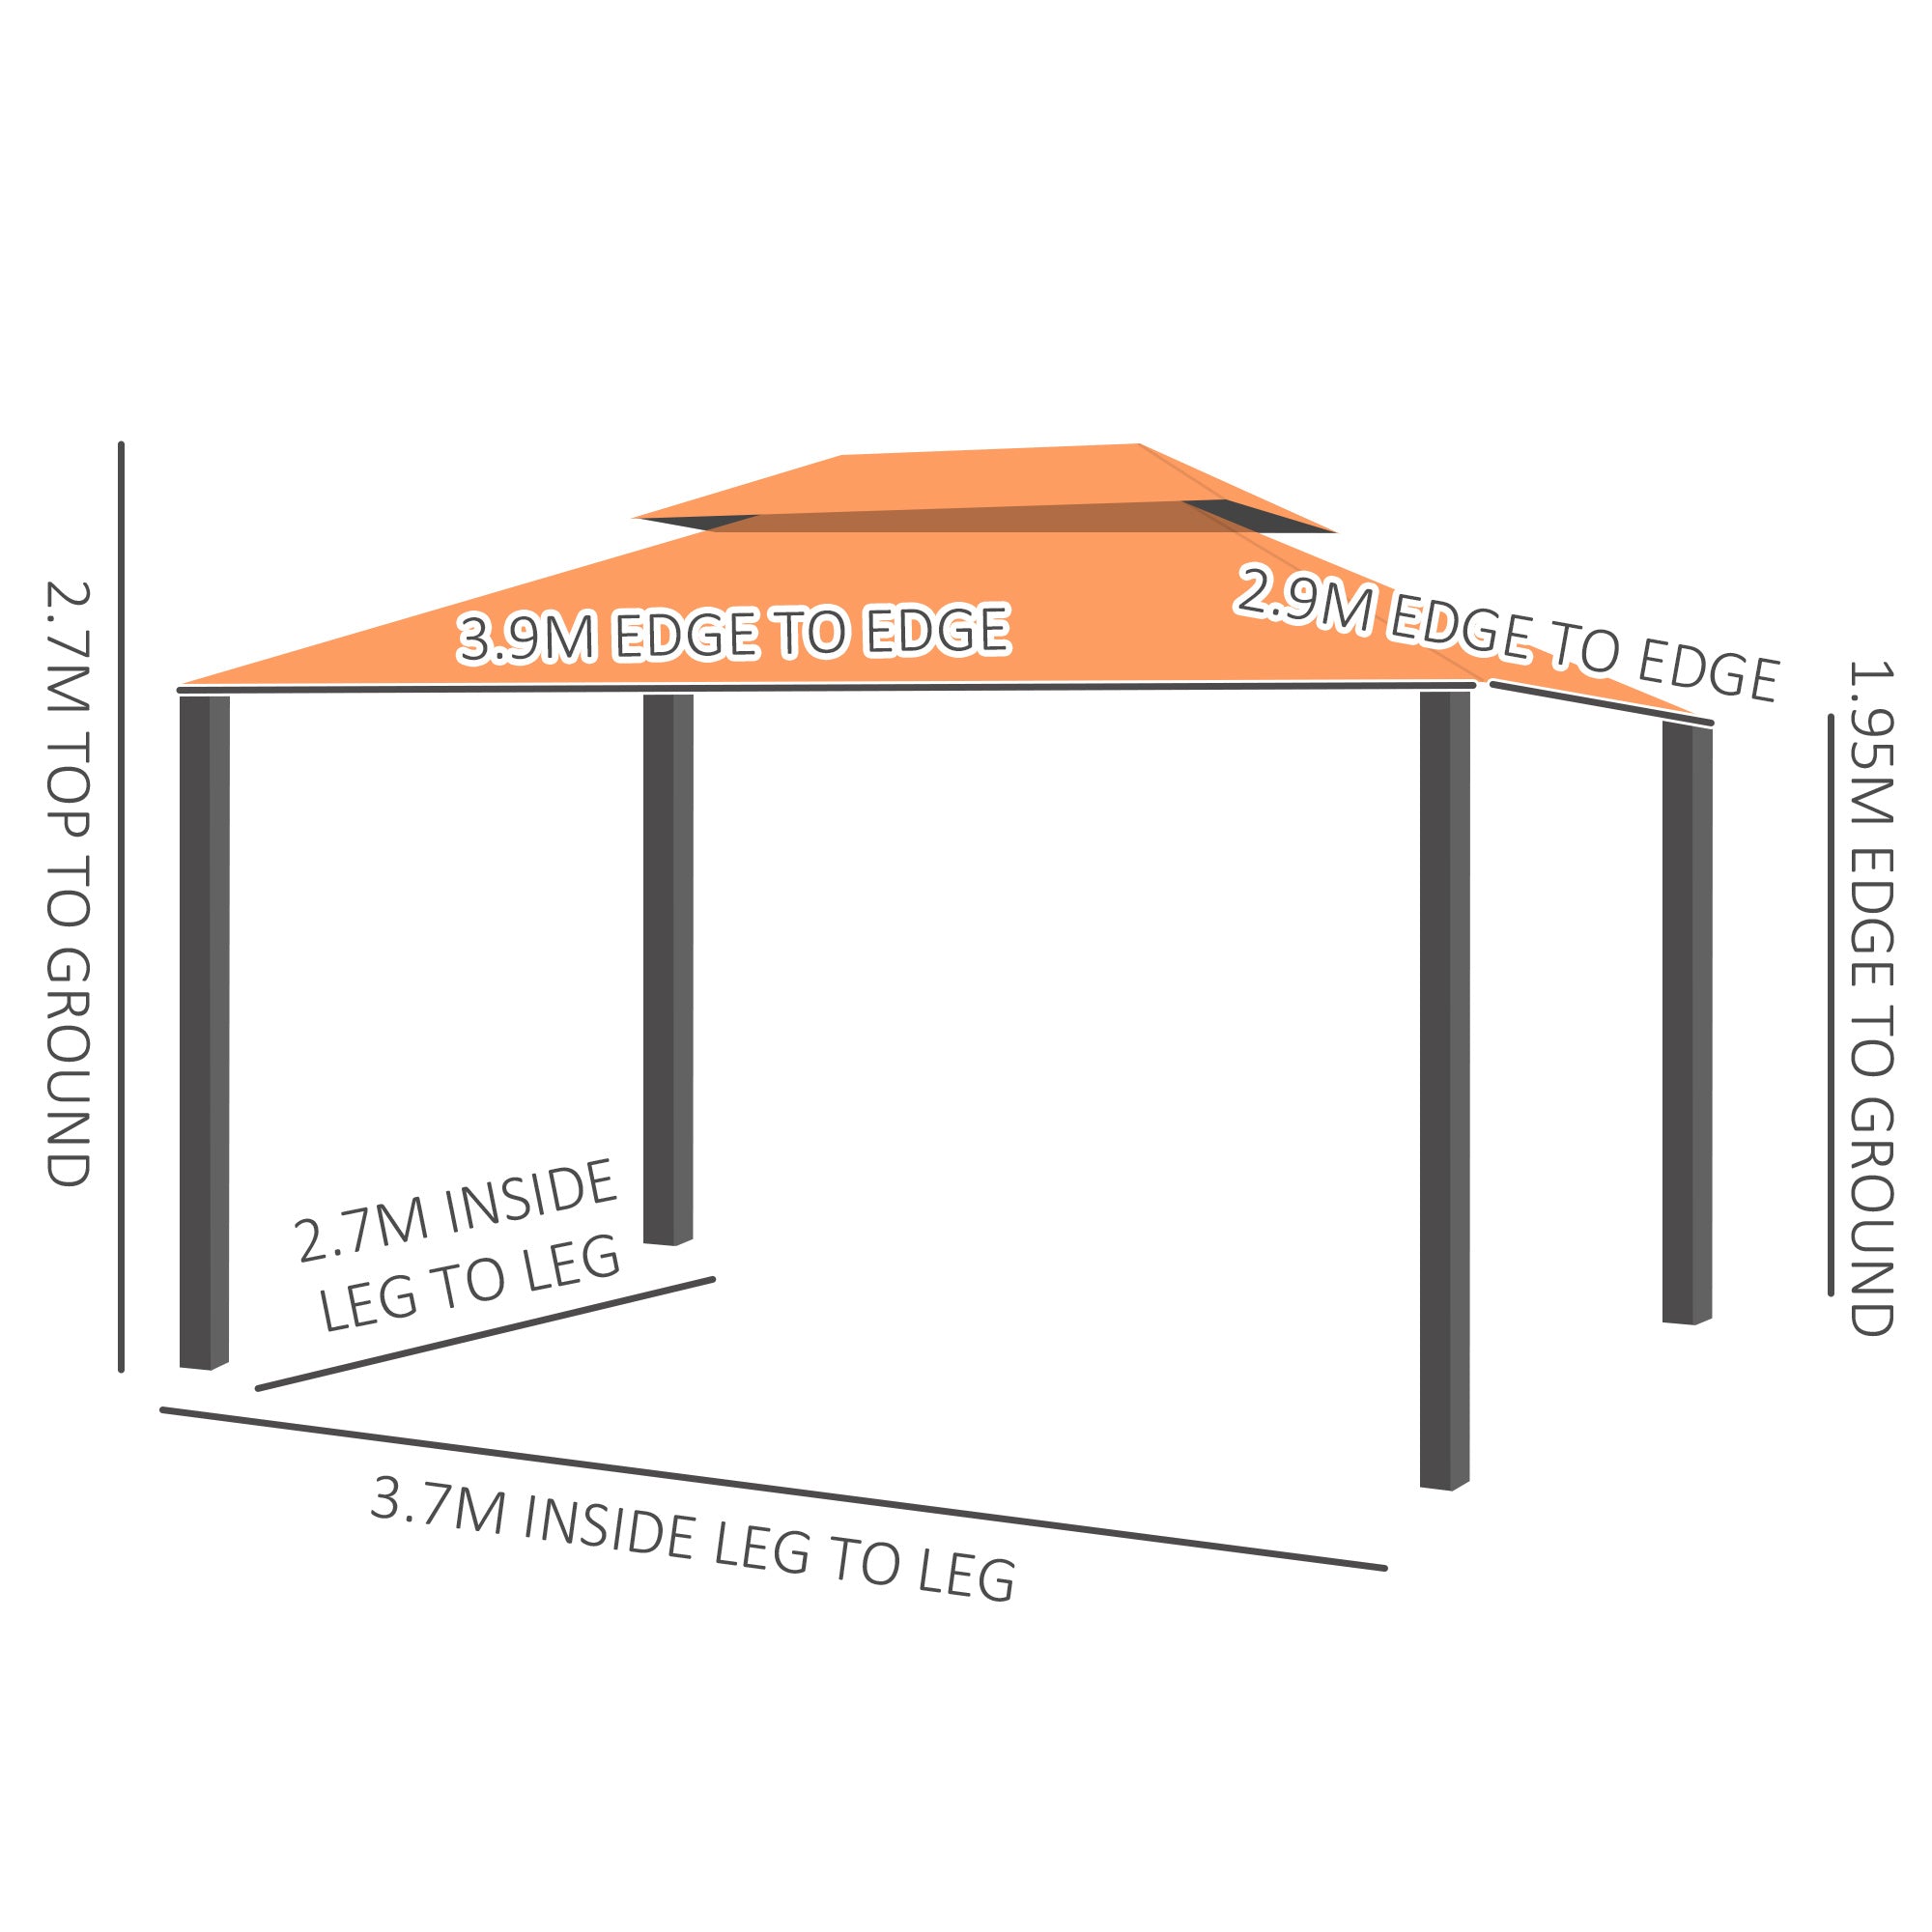 3 x 4 m Aluminium Metal Gazebo Marquee Canopy Pavilion Patio Garden Party Tent Shelter with Nets and Sidewalls - Orange-2